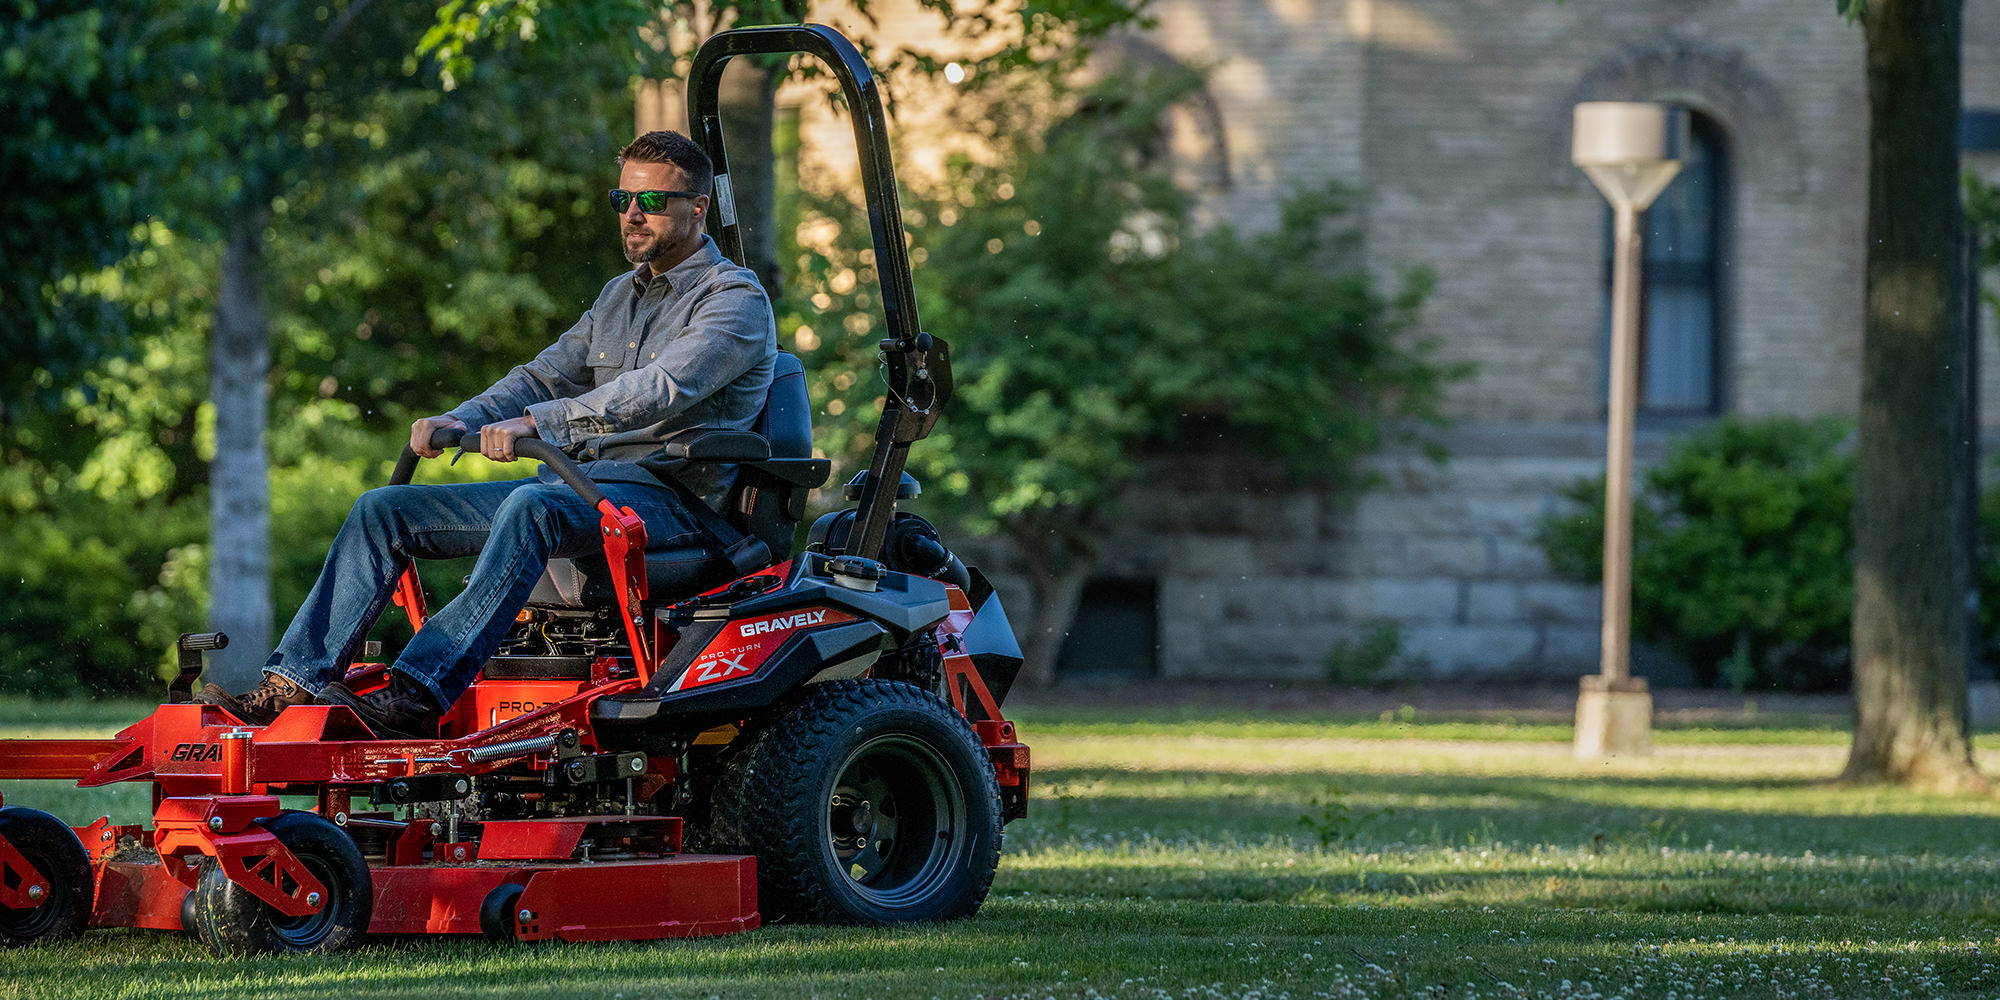 The Mexican Lawnmowers: a Green Lawn Care in 2023